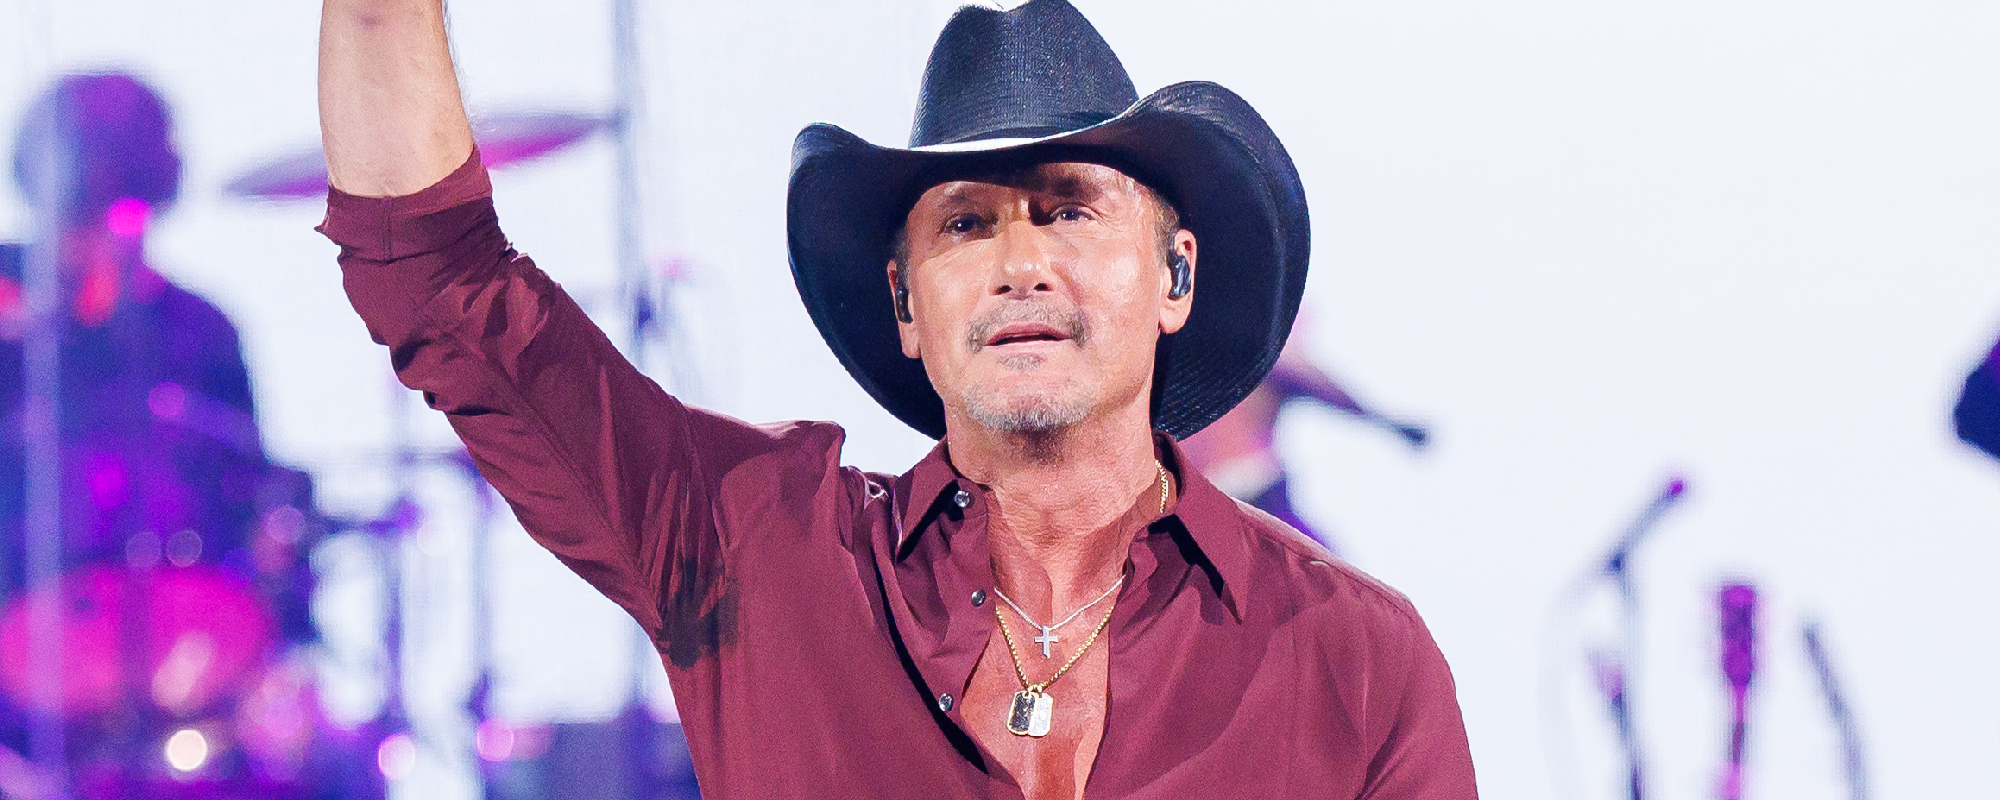 Tim McGraw Remembers “Great Artist” Toby Keith With Emotional “Live Like You Were Dying” Performance